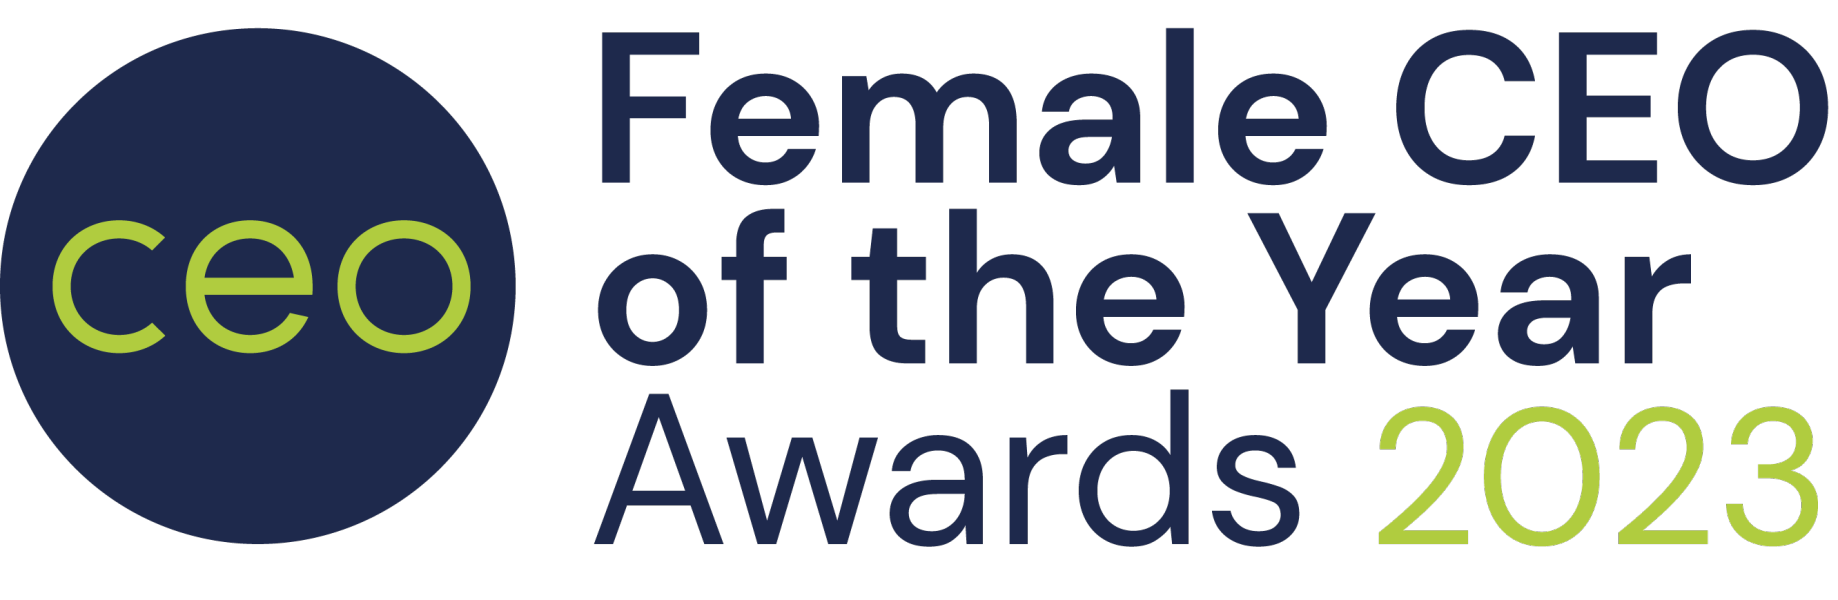 Female CEO of the Year Awards 2023